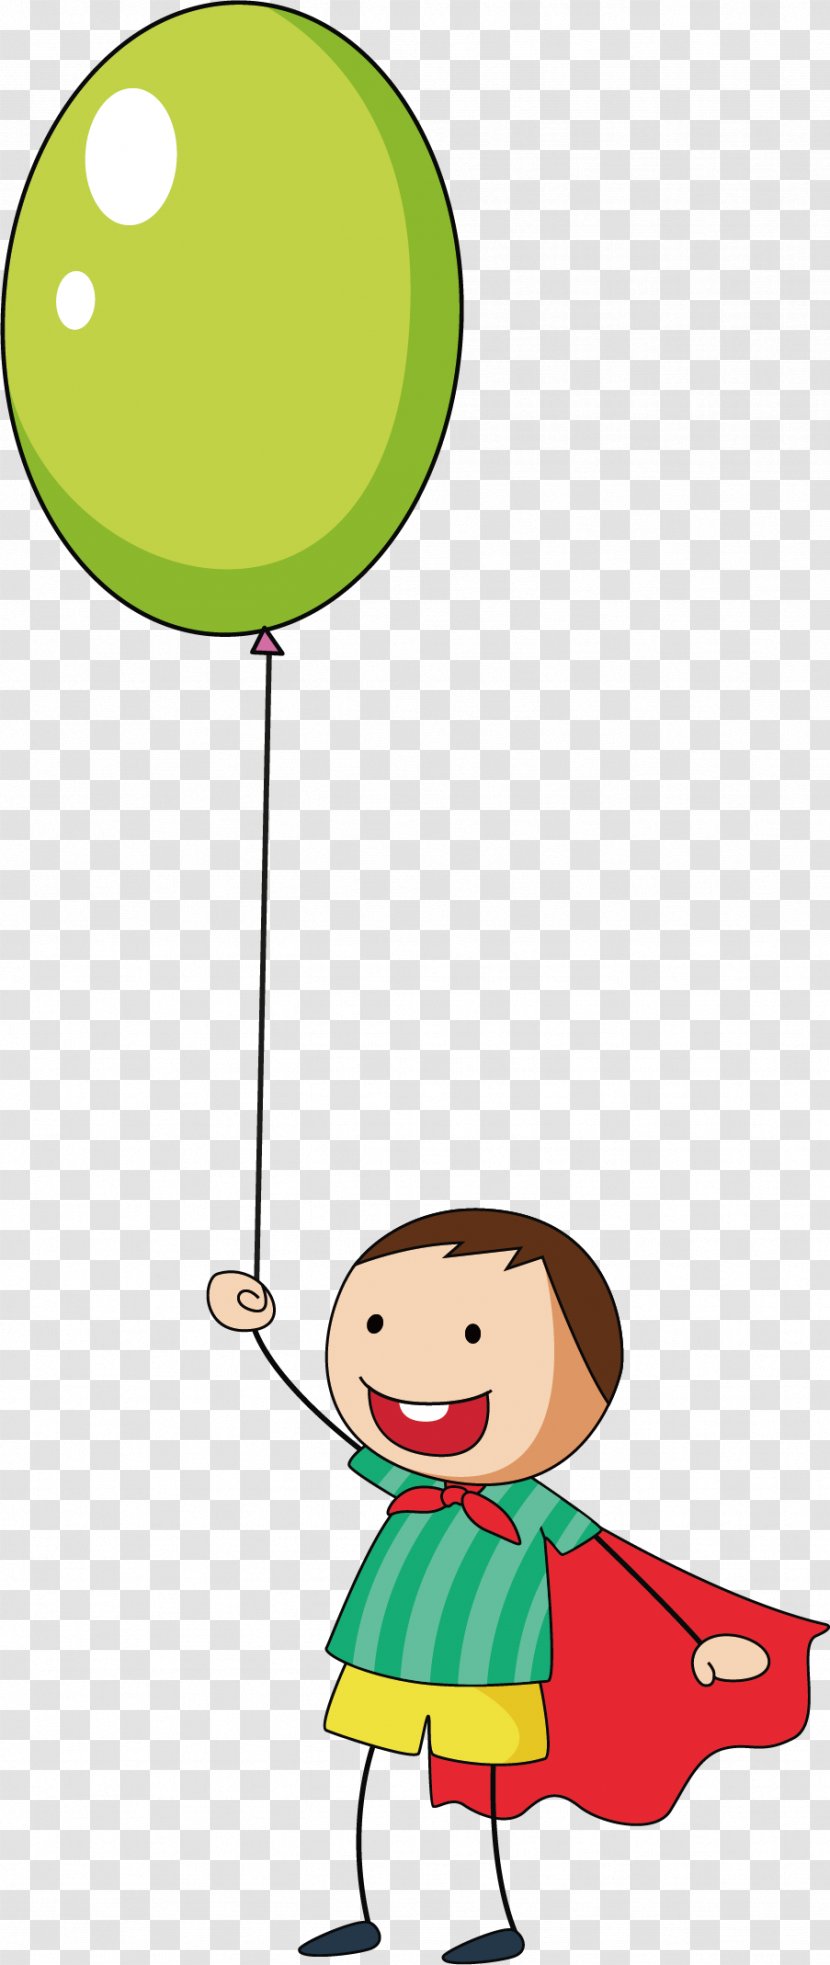 Child All Ordinaries Drawing Australian Securities Exchange - Baby Toys - Vector Illustration Of A Boy Playing Balloons Transparent PNG